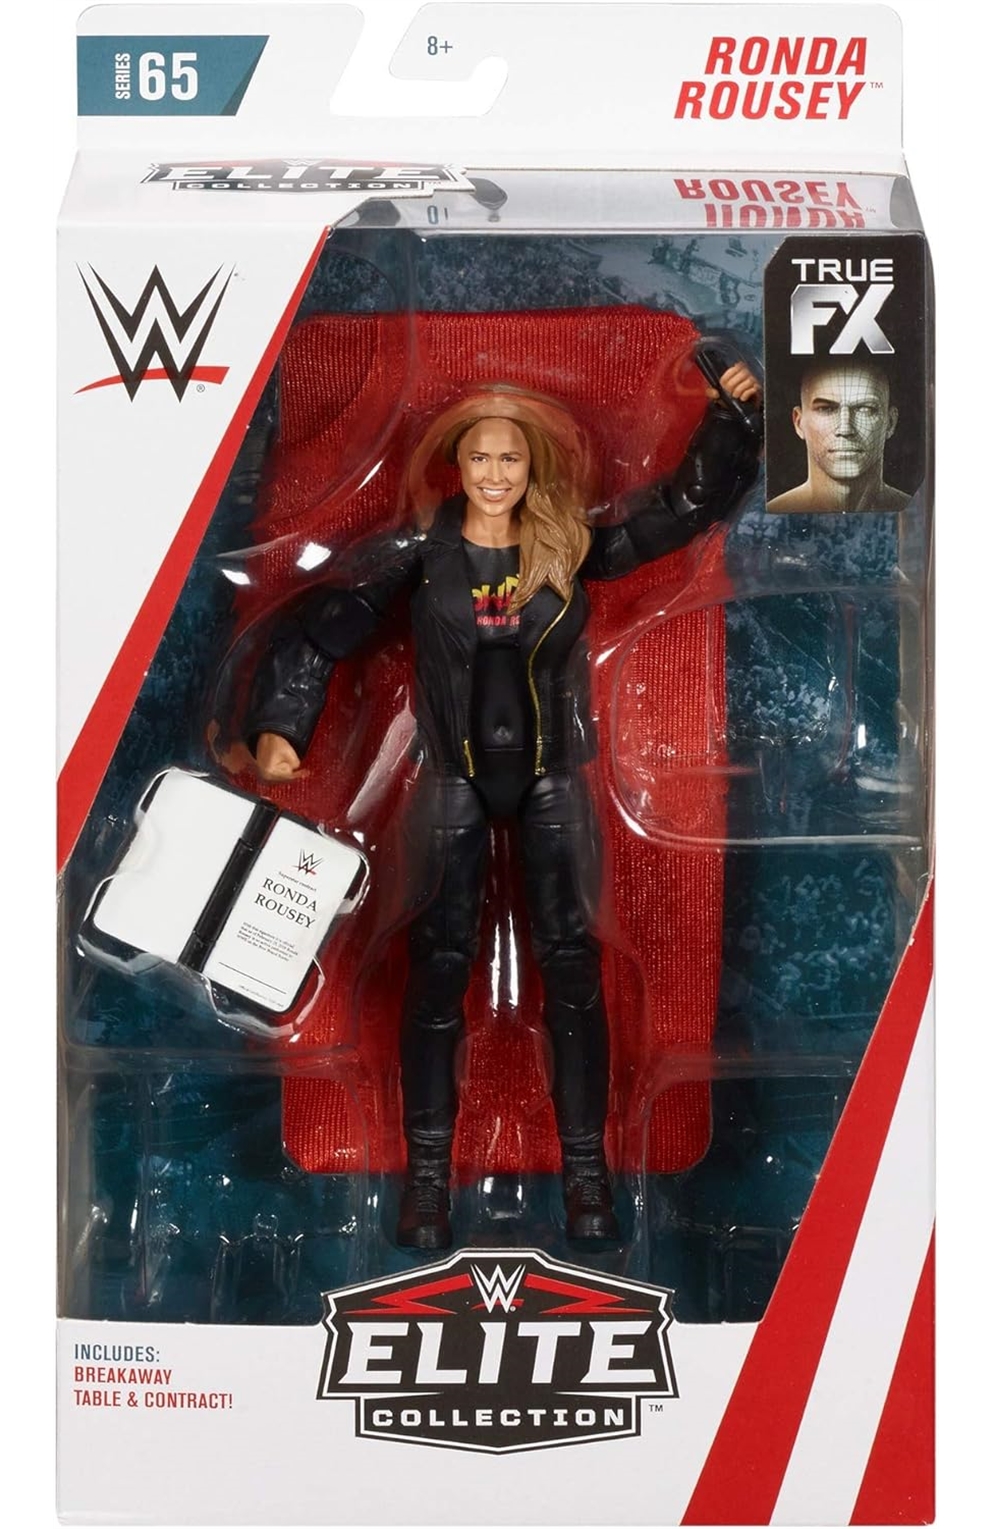 Wwe Ronda Rousey Elite Collection Deluxe Action Figure 